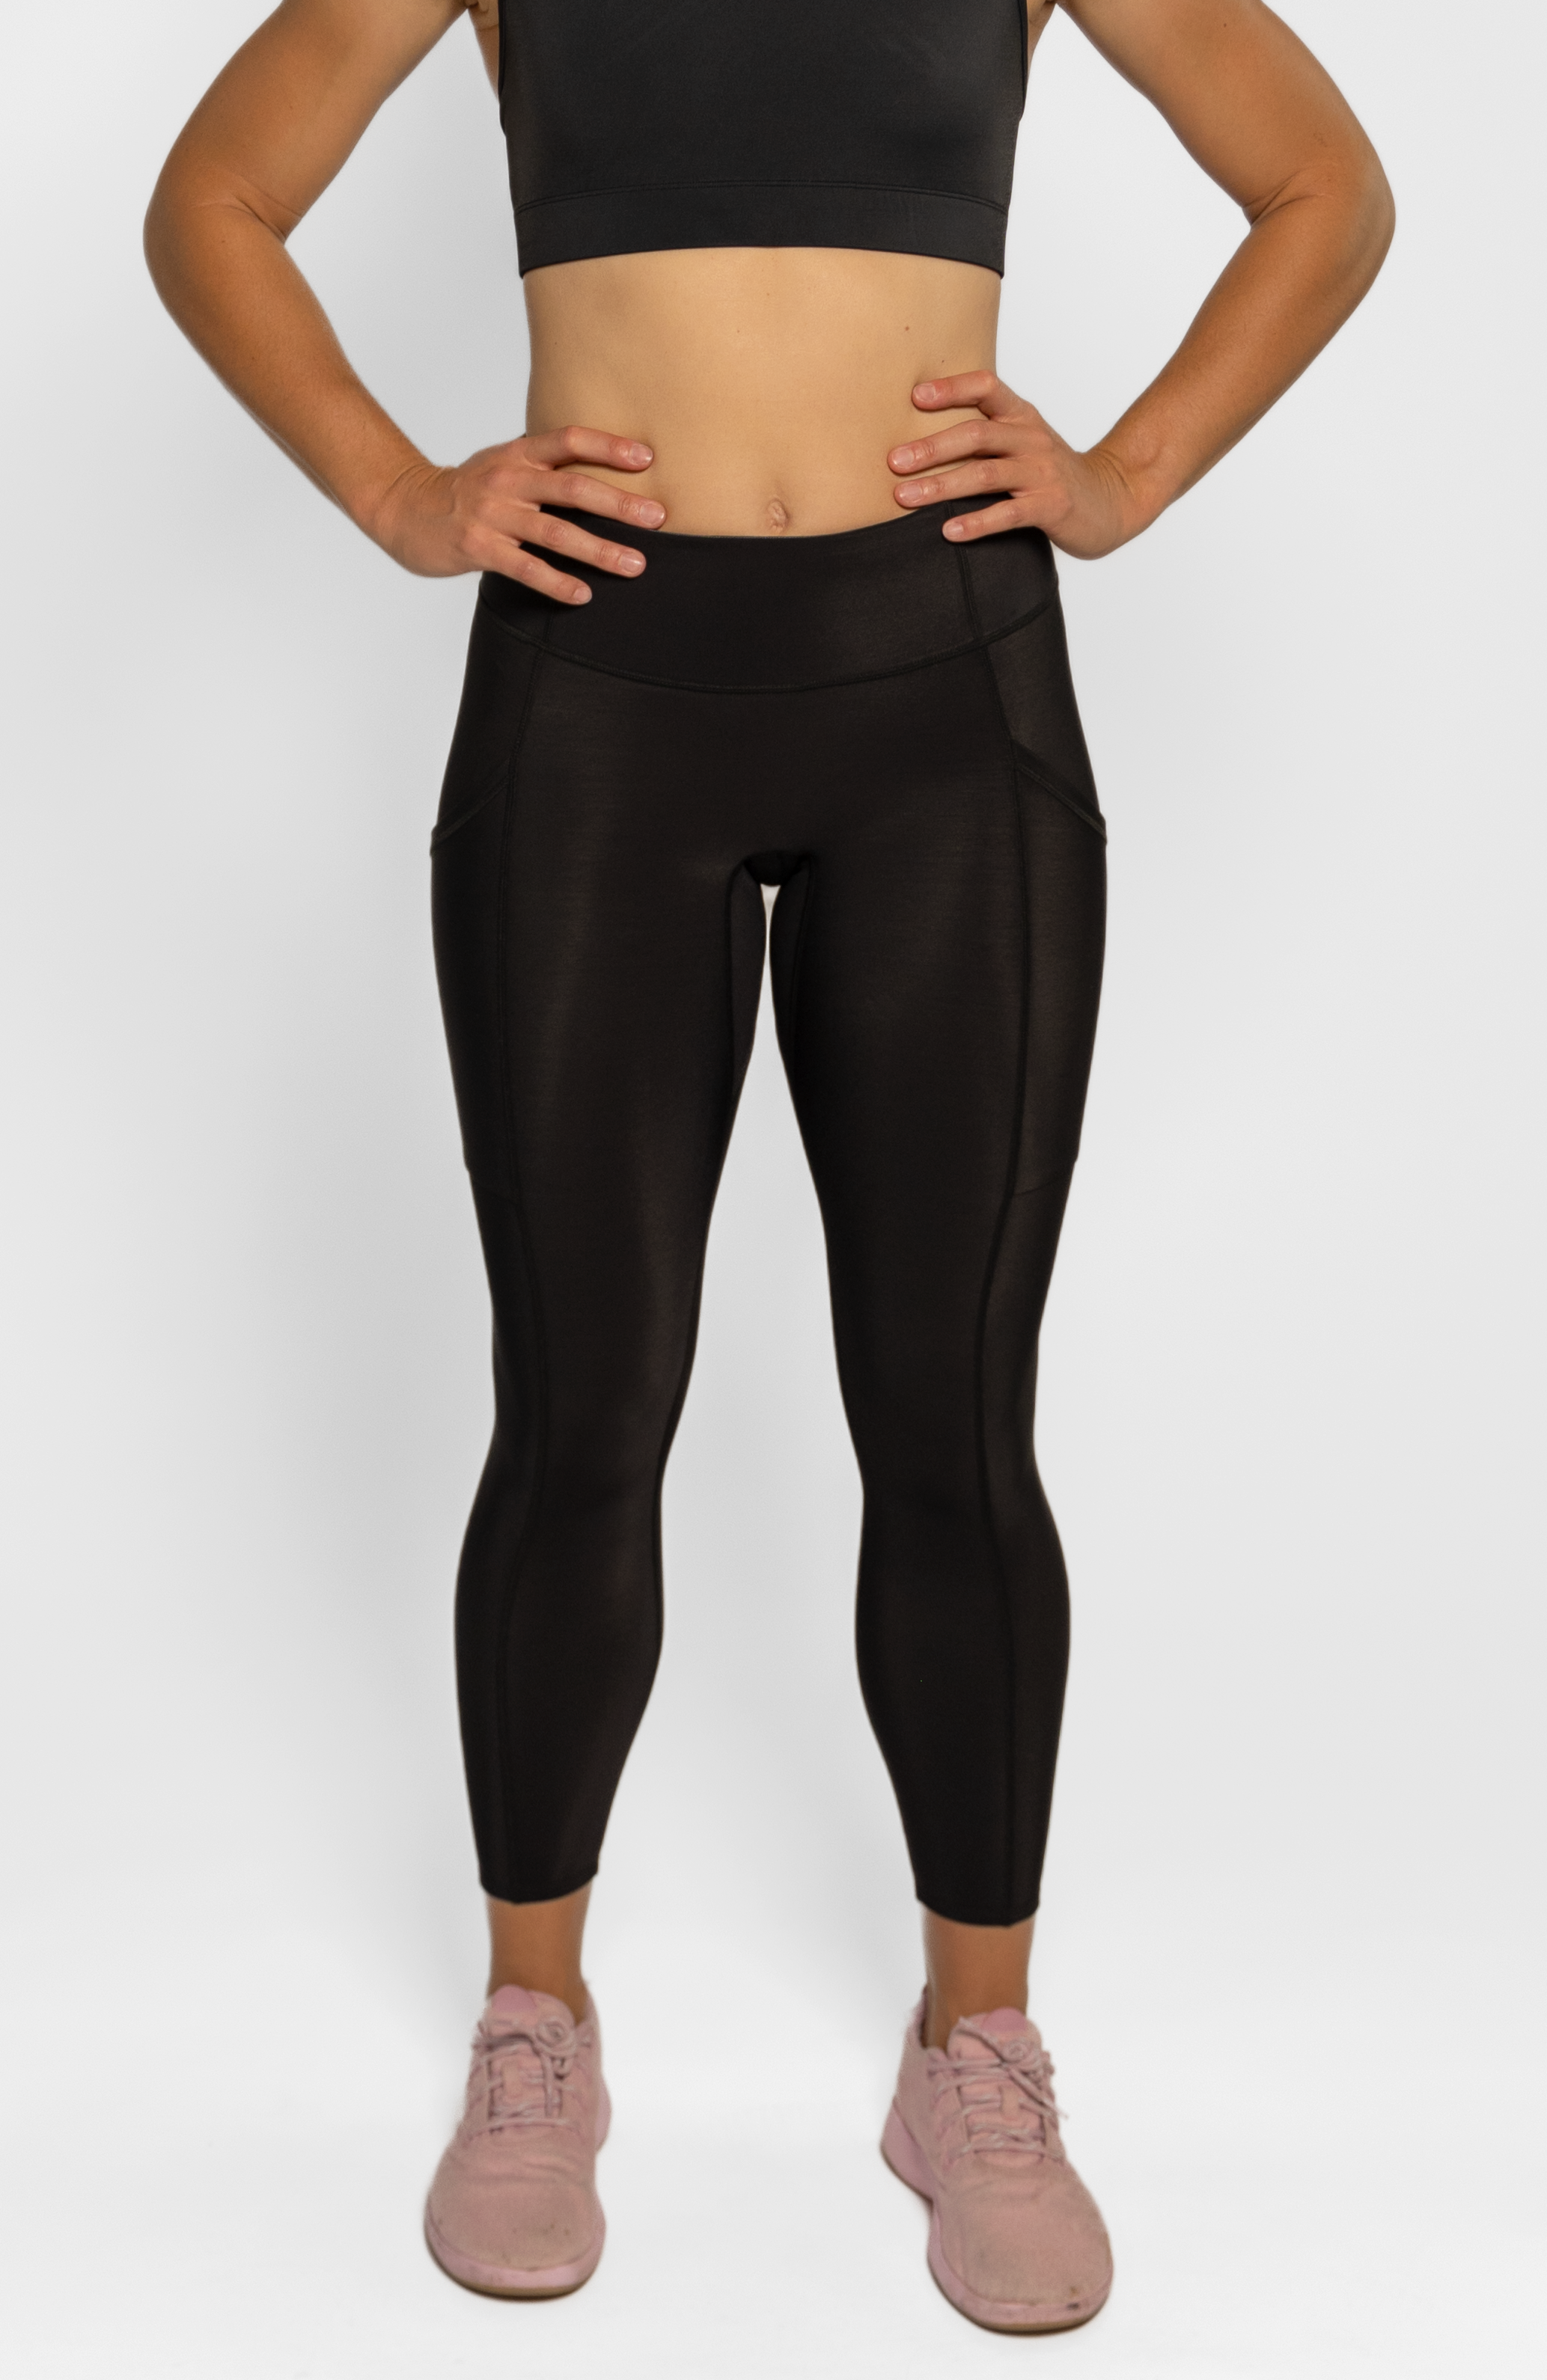 On Women's Performance Tights 7/8 in Black, Size: Large  Running tights  women, Performance leggings, Running tights